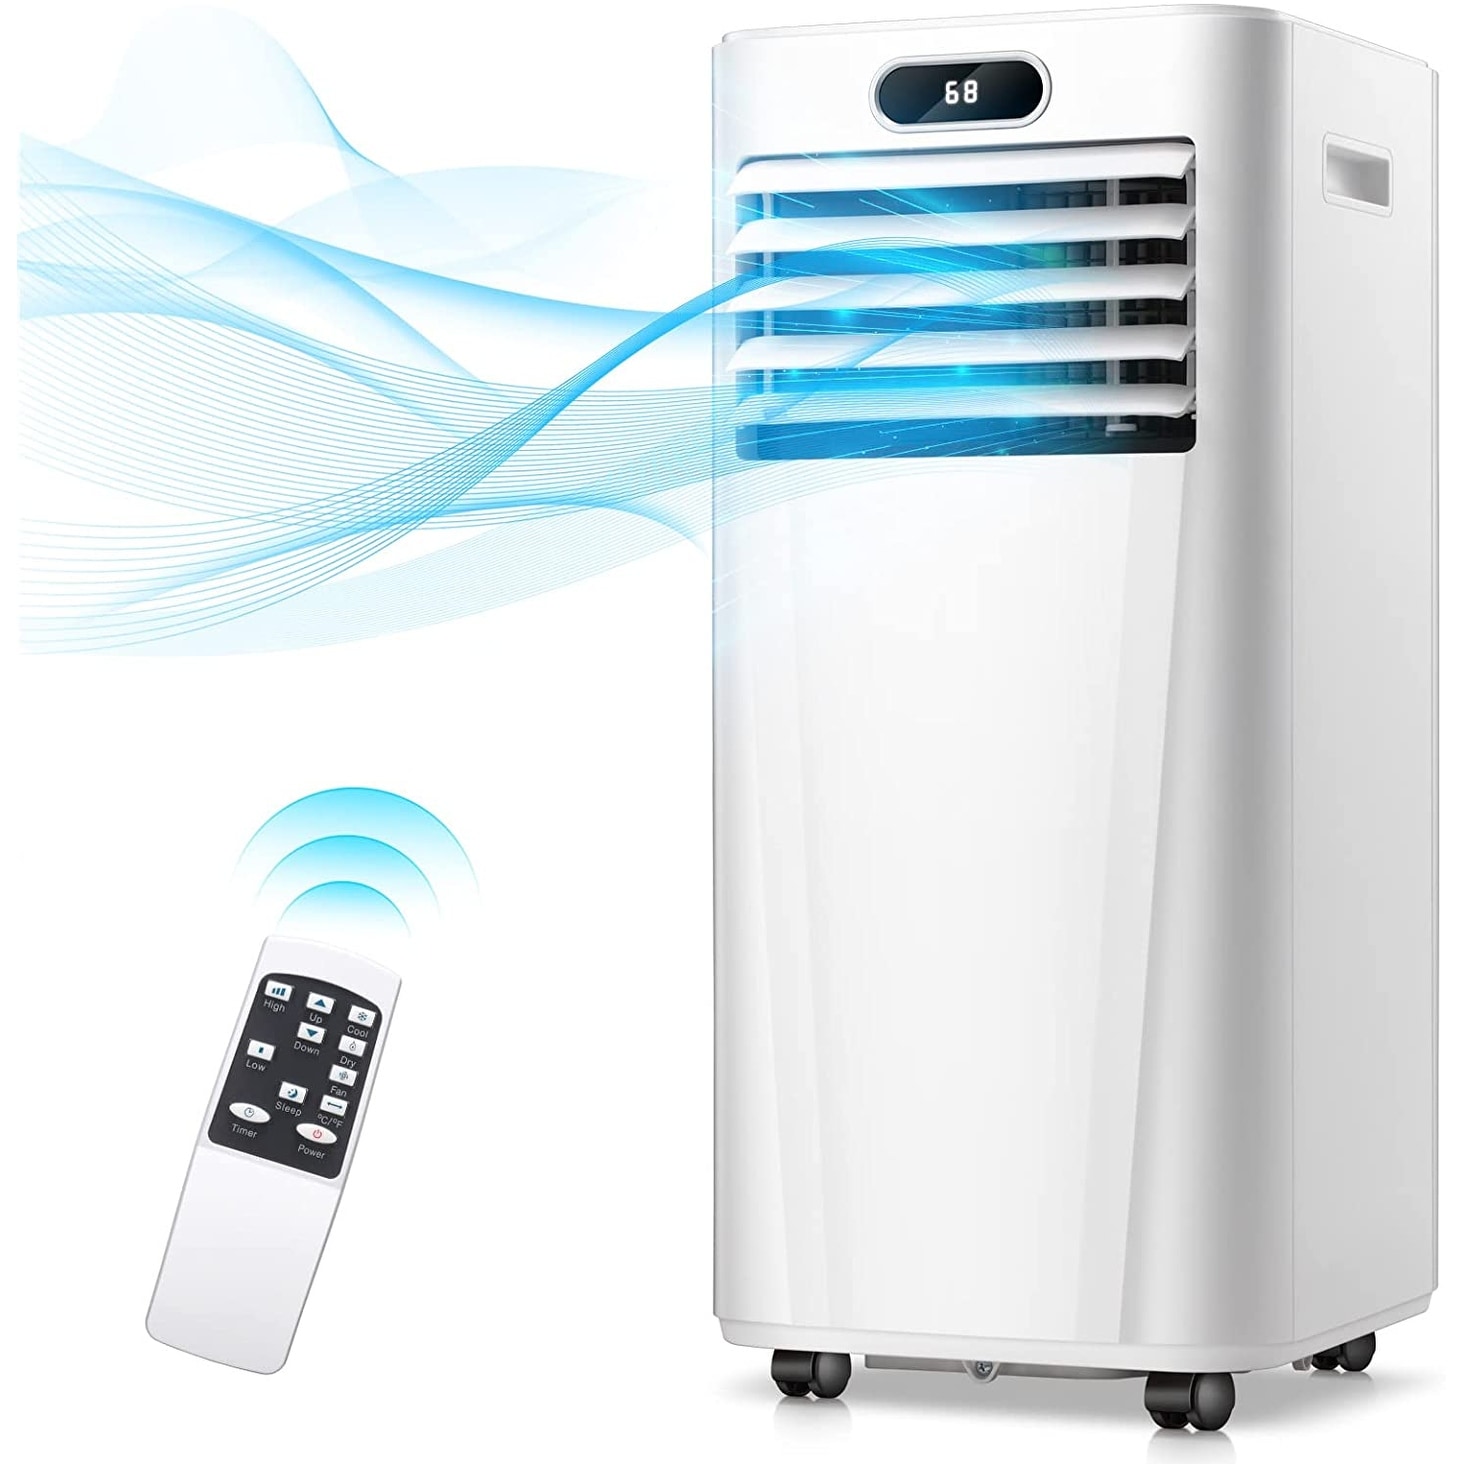 https://ak1.ostkcdn.com/images/products/is/images/direct/a4f547853ddd778bee167c96637bd4f213d1cd68/10%2C000BTU-Portable-Air-Conditioner-with-Built-in-Dehumidifier-Function%2C-Fan-Mode%2CPortable-ac-unit-with-Remote-Control.jpg